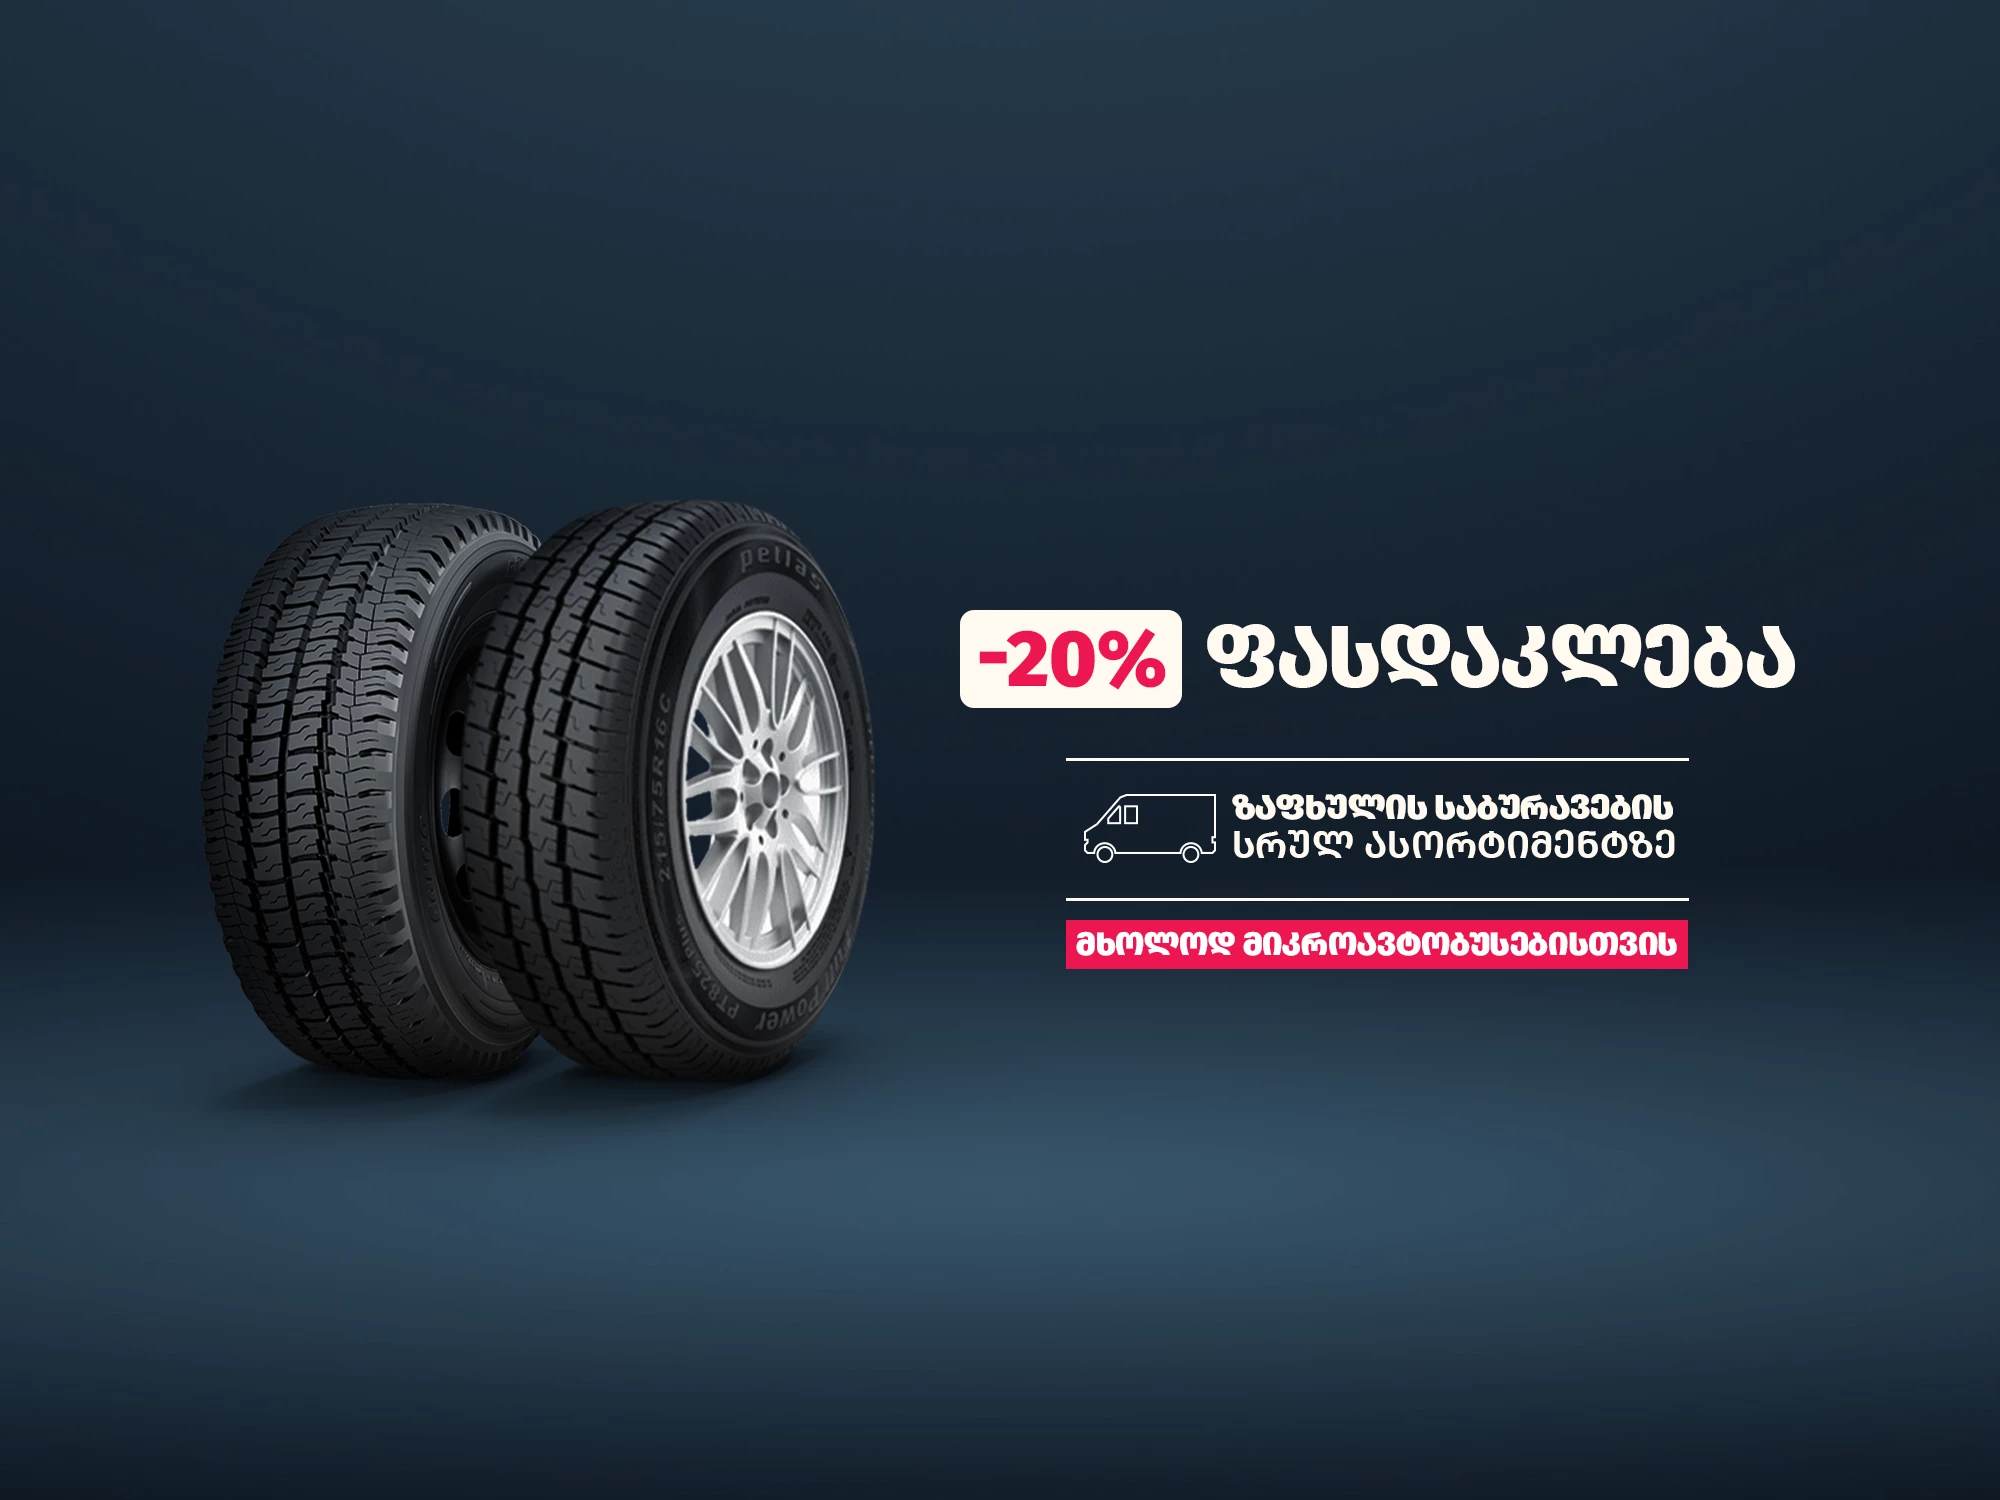 20% DISCOUNT ON MINIBUS SUMMER TIRES! Offer Image